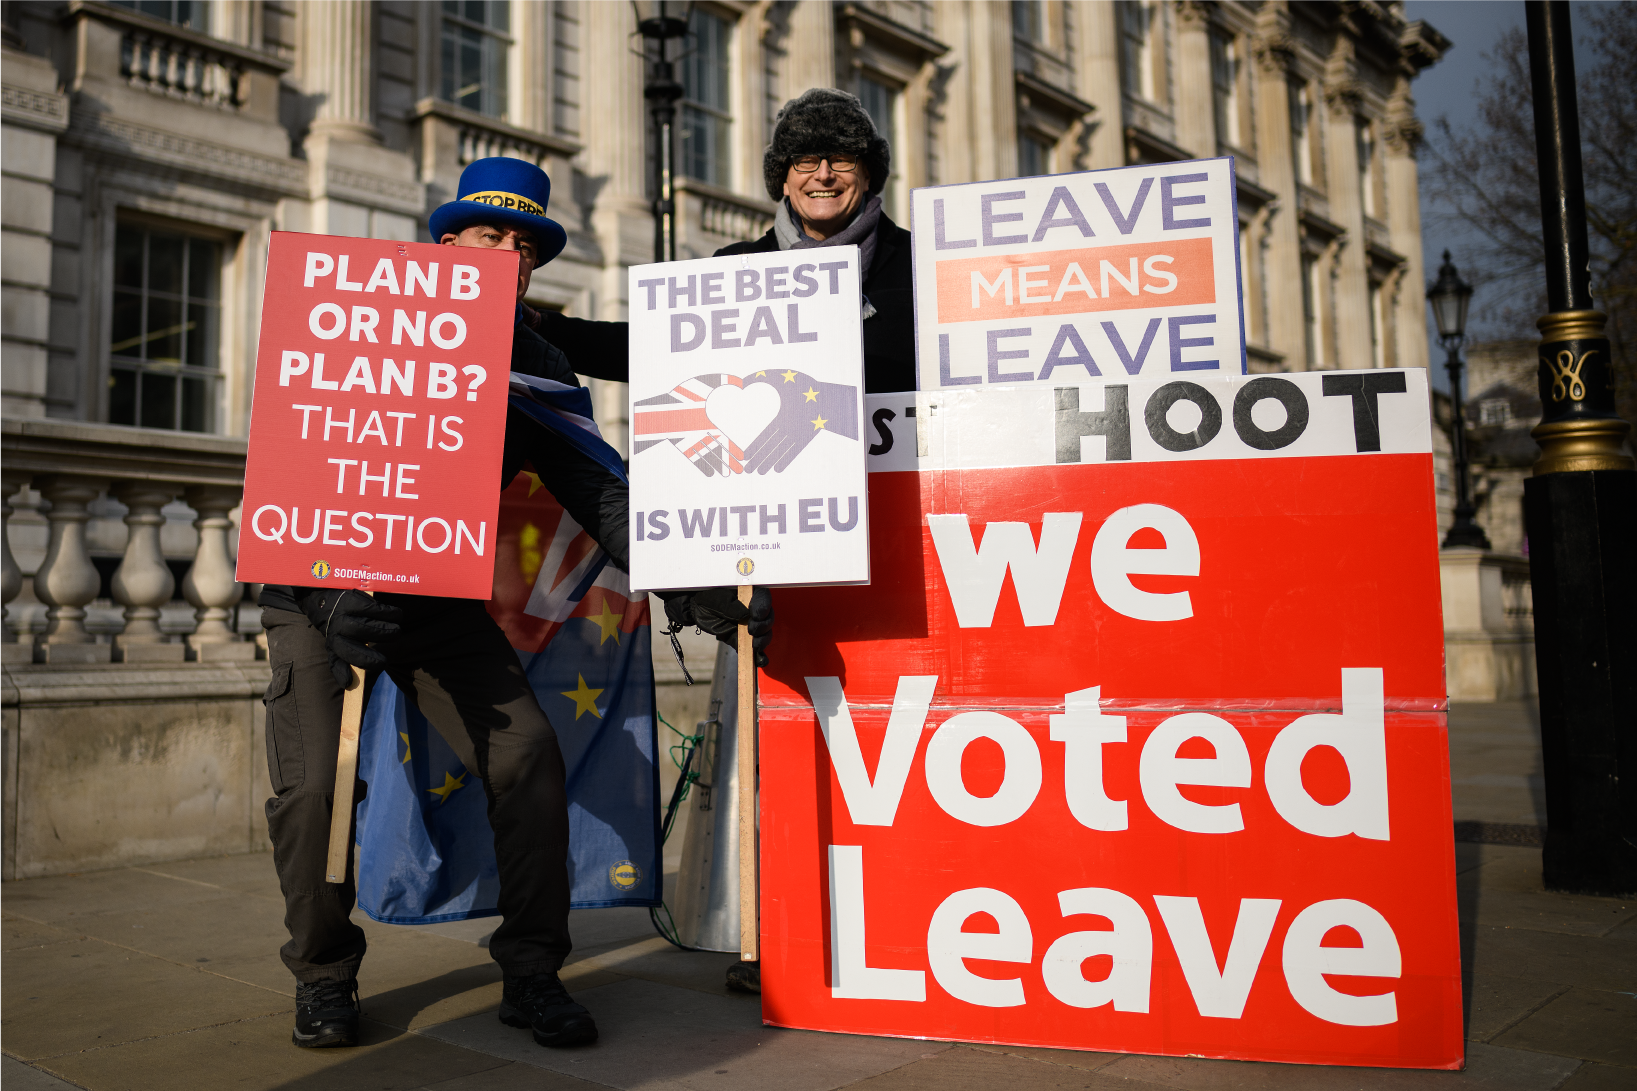 Photograph of Brexit supporters and protesters holding signs